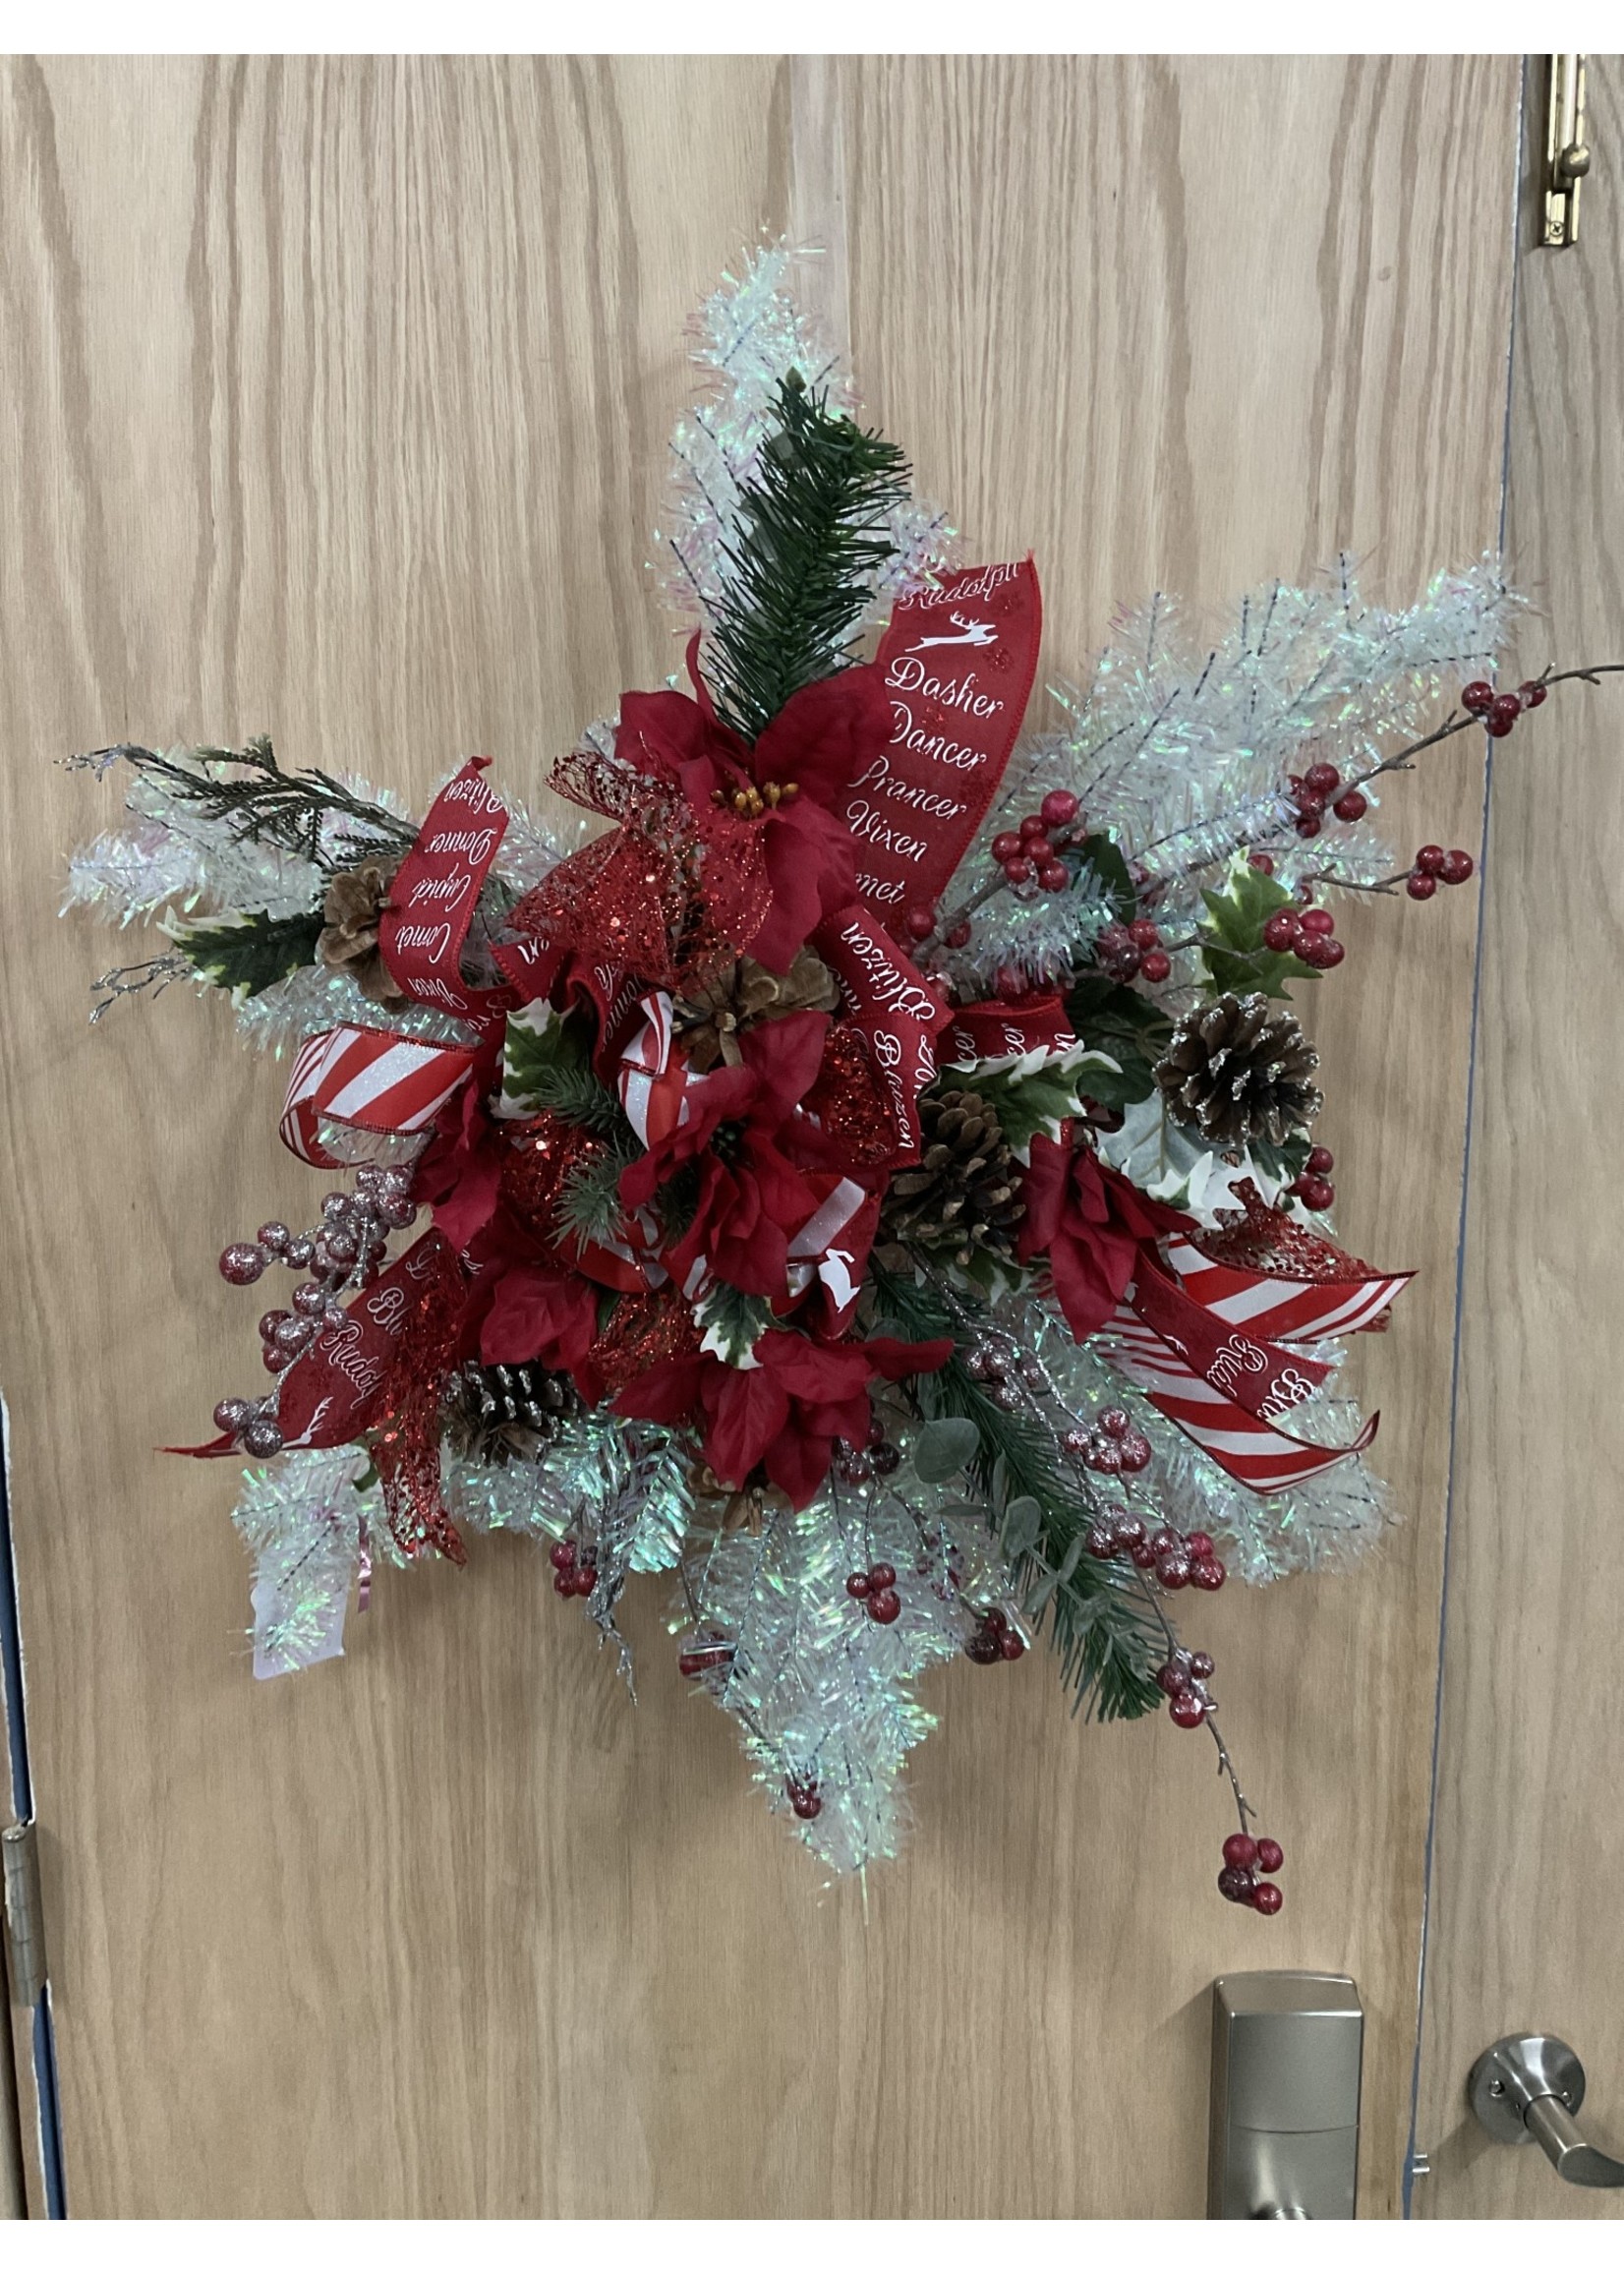 My New Favorite Thing Wreath Star Iridescent Red Poinsettia w/Reindeer Names Ribbon 27 inches